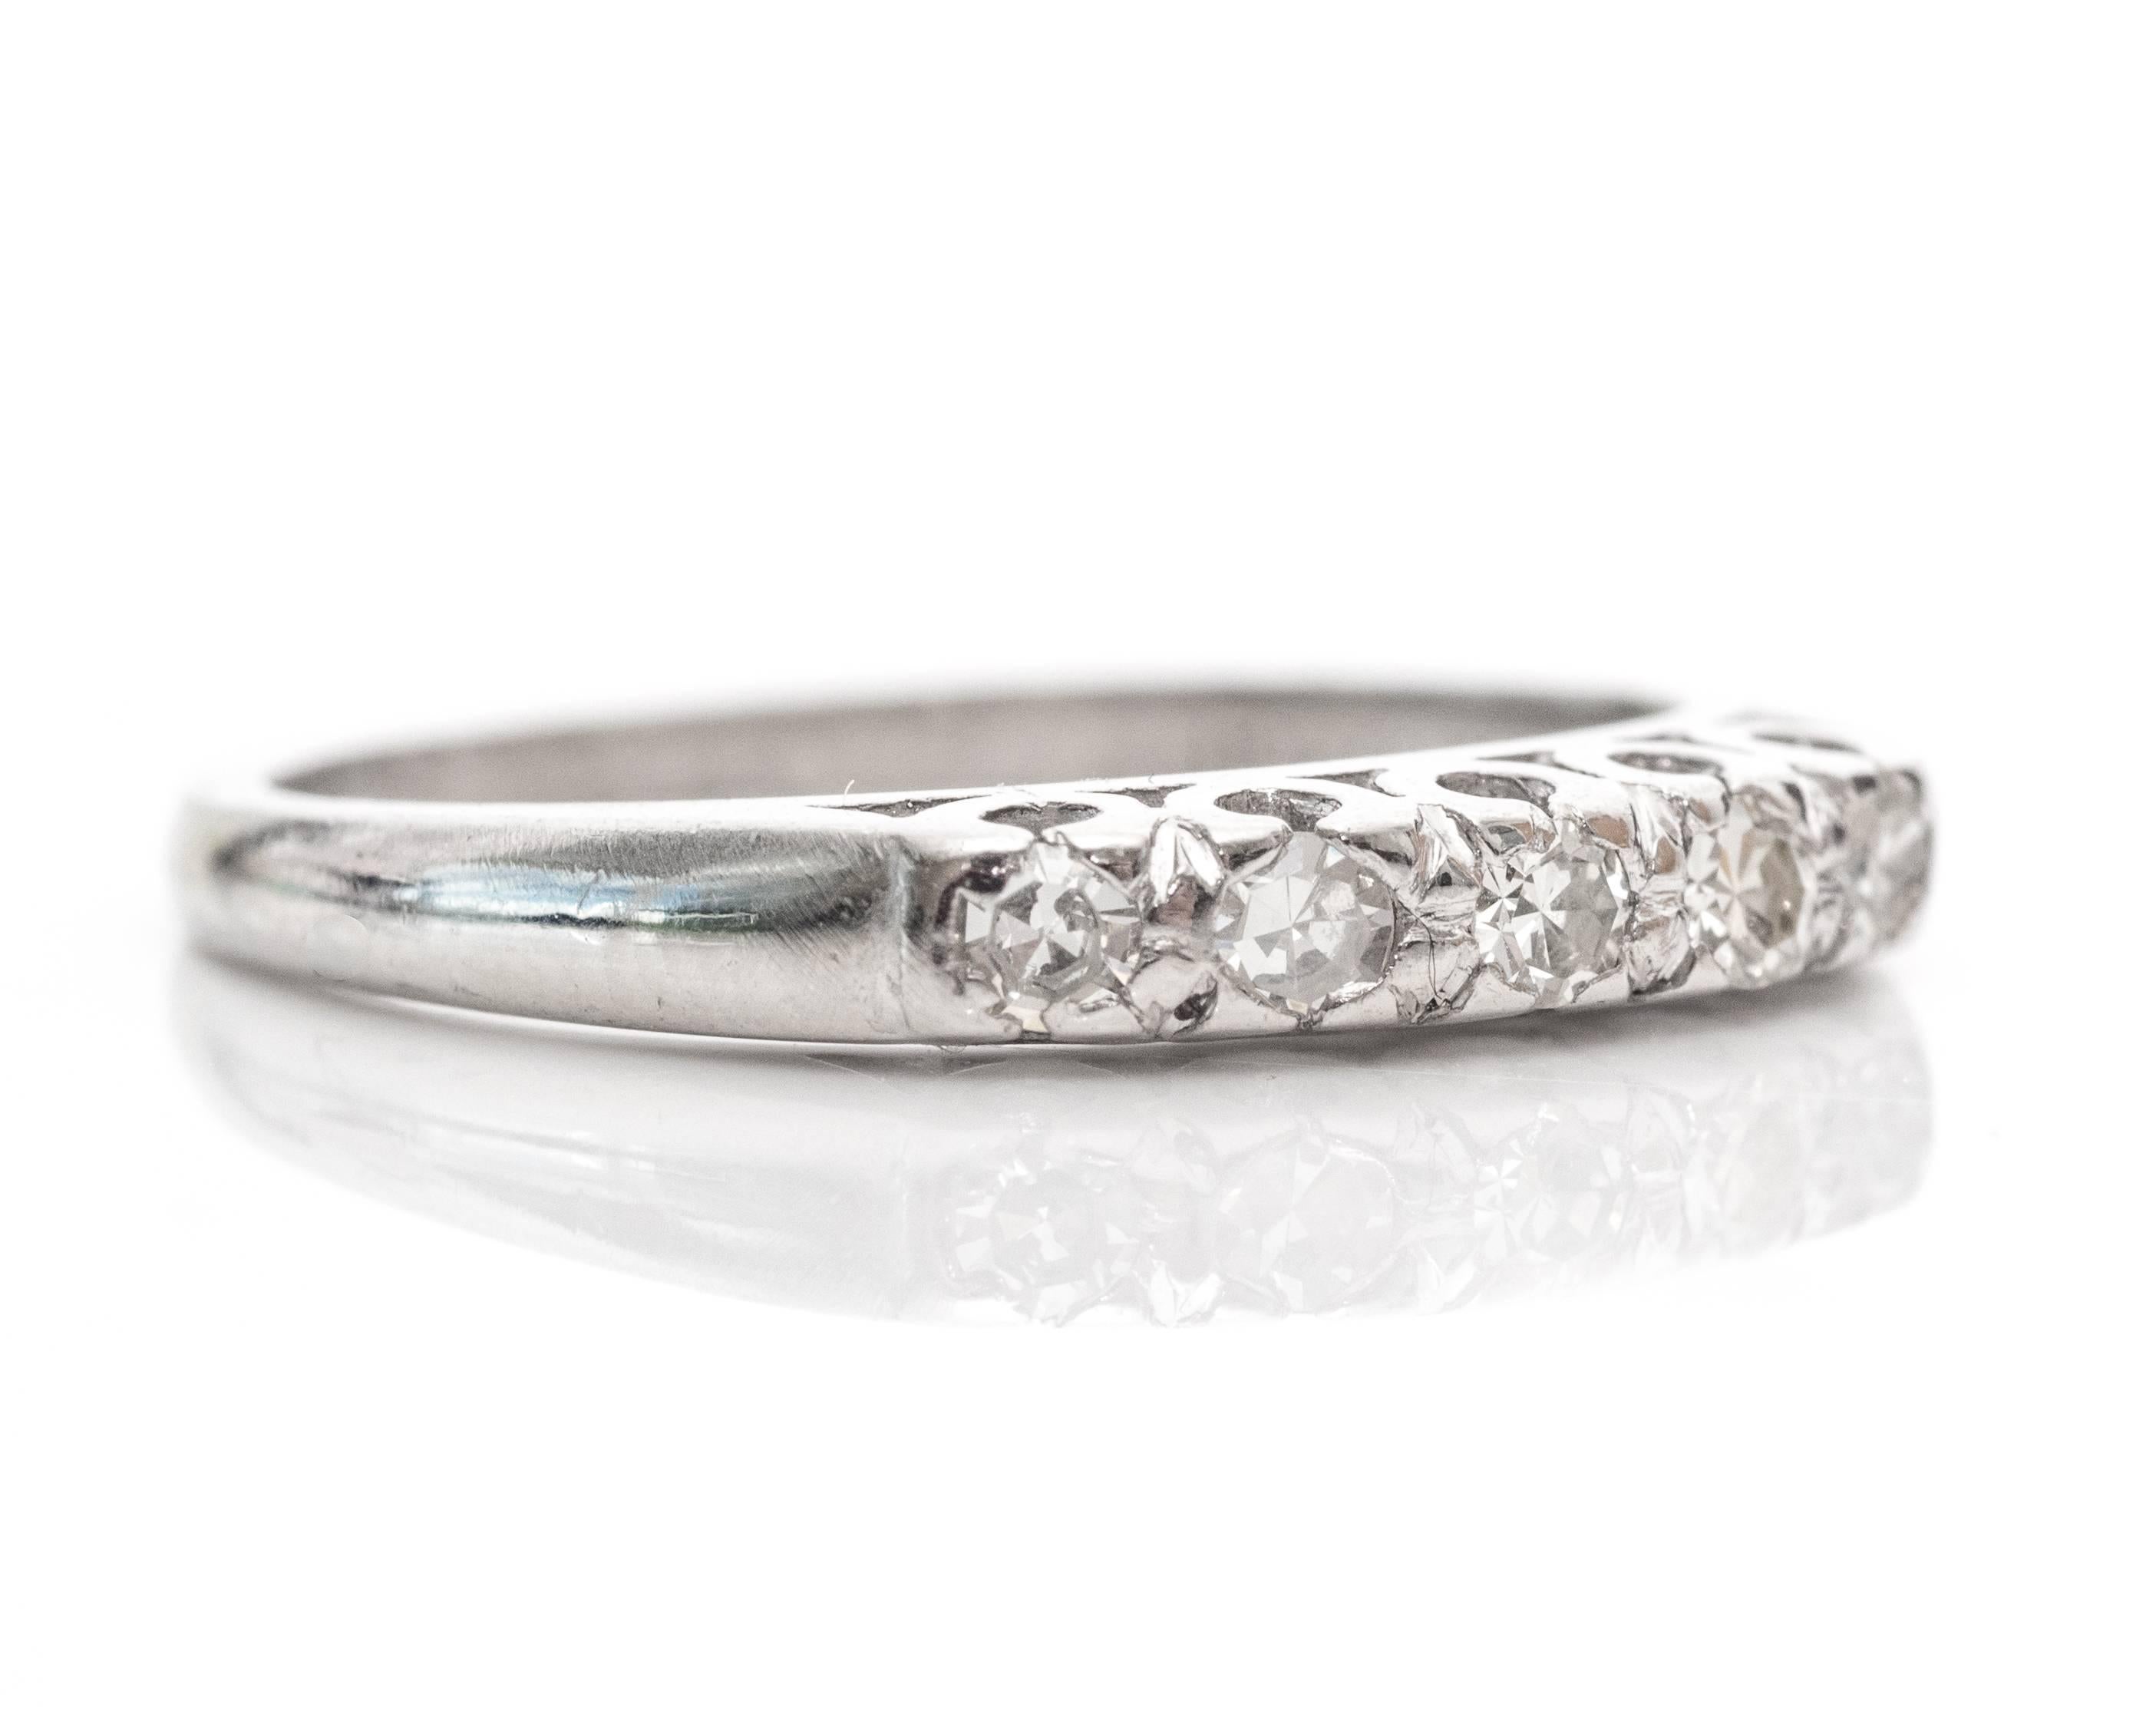 1920s Art Deco .10 Carat Diamond Platinum Wedding Band. This band is sparkling with a total of 5 diamonds along the front frame. The single cut diamonds total to .10carat. The stones are embedded in bezel frames with the sides visible underneath the